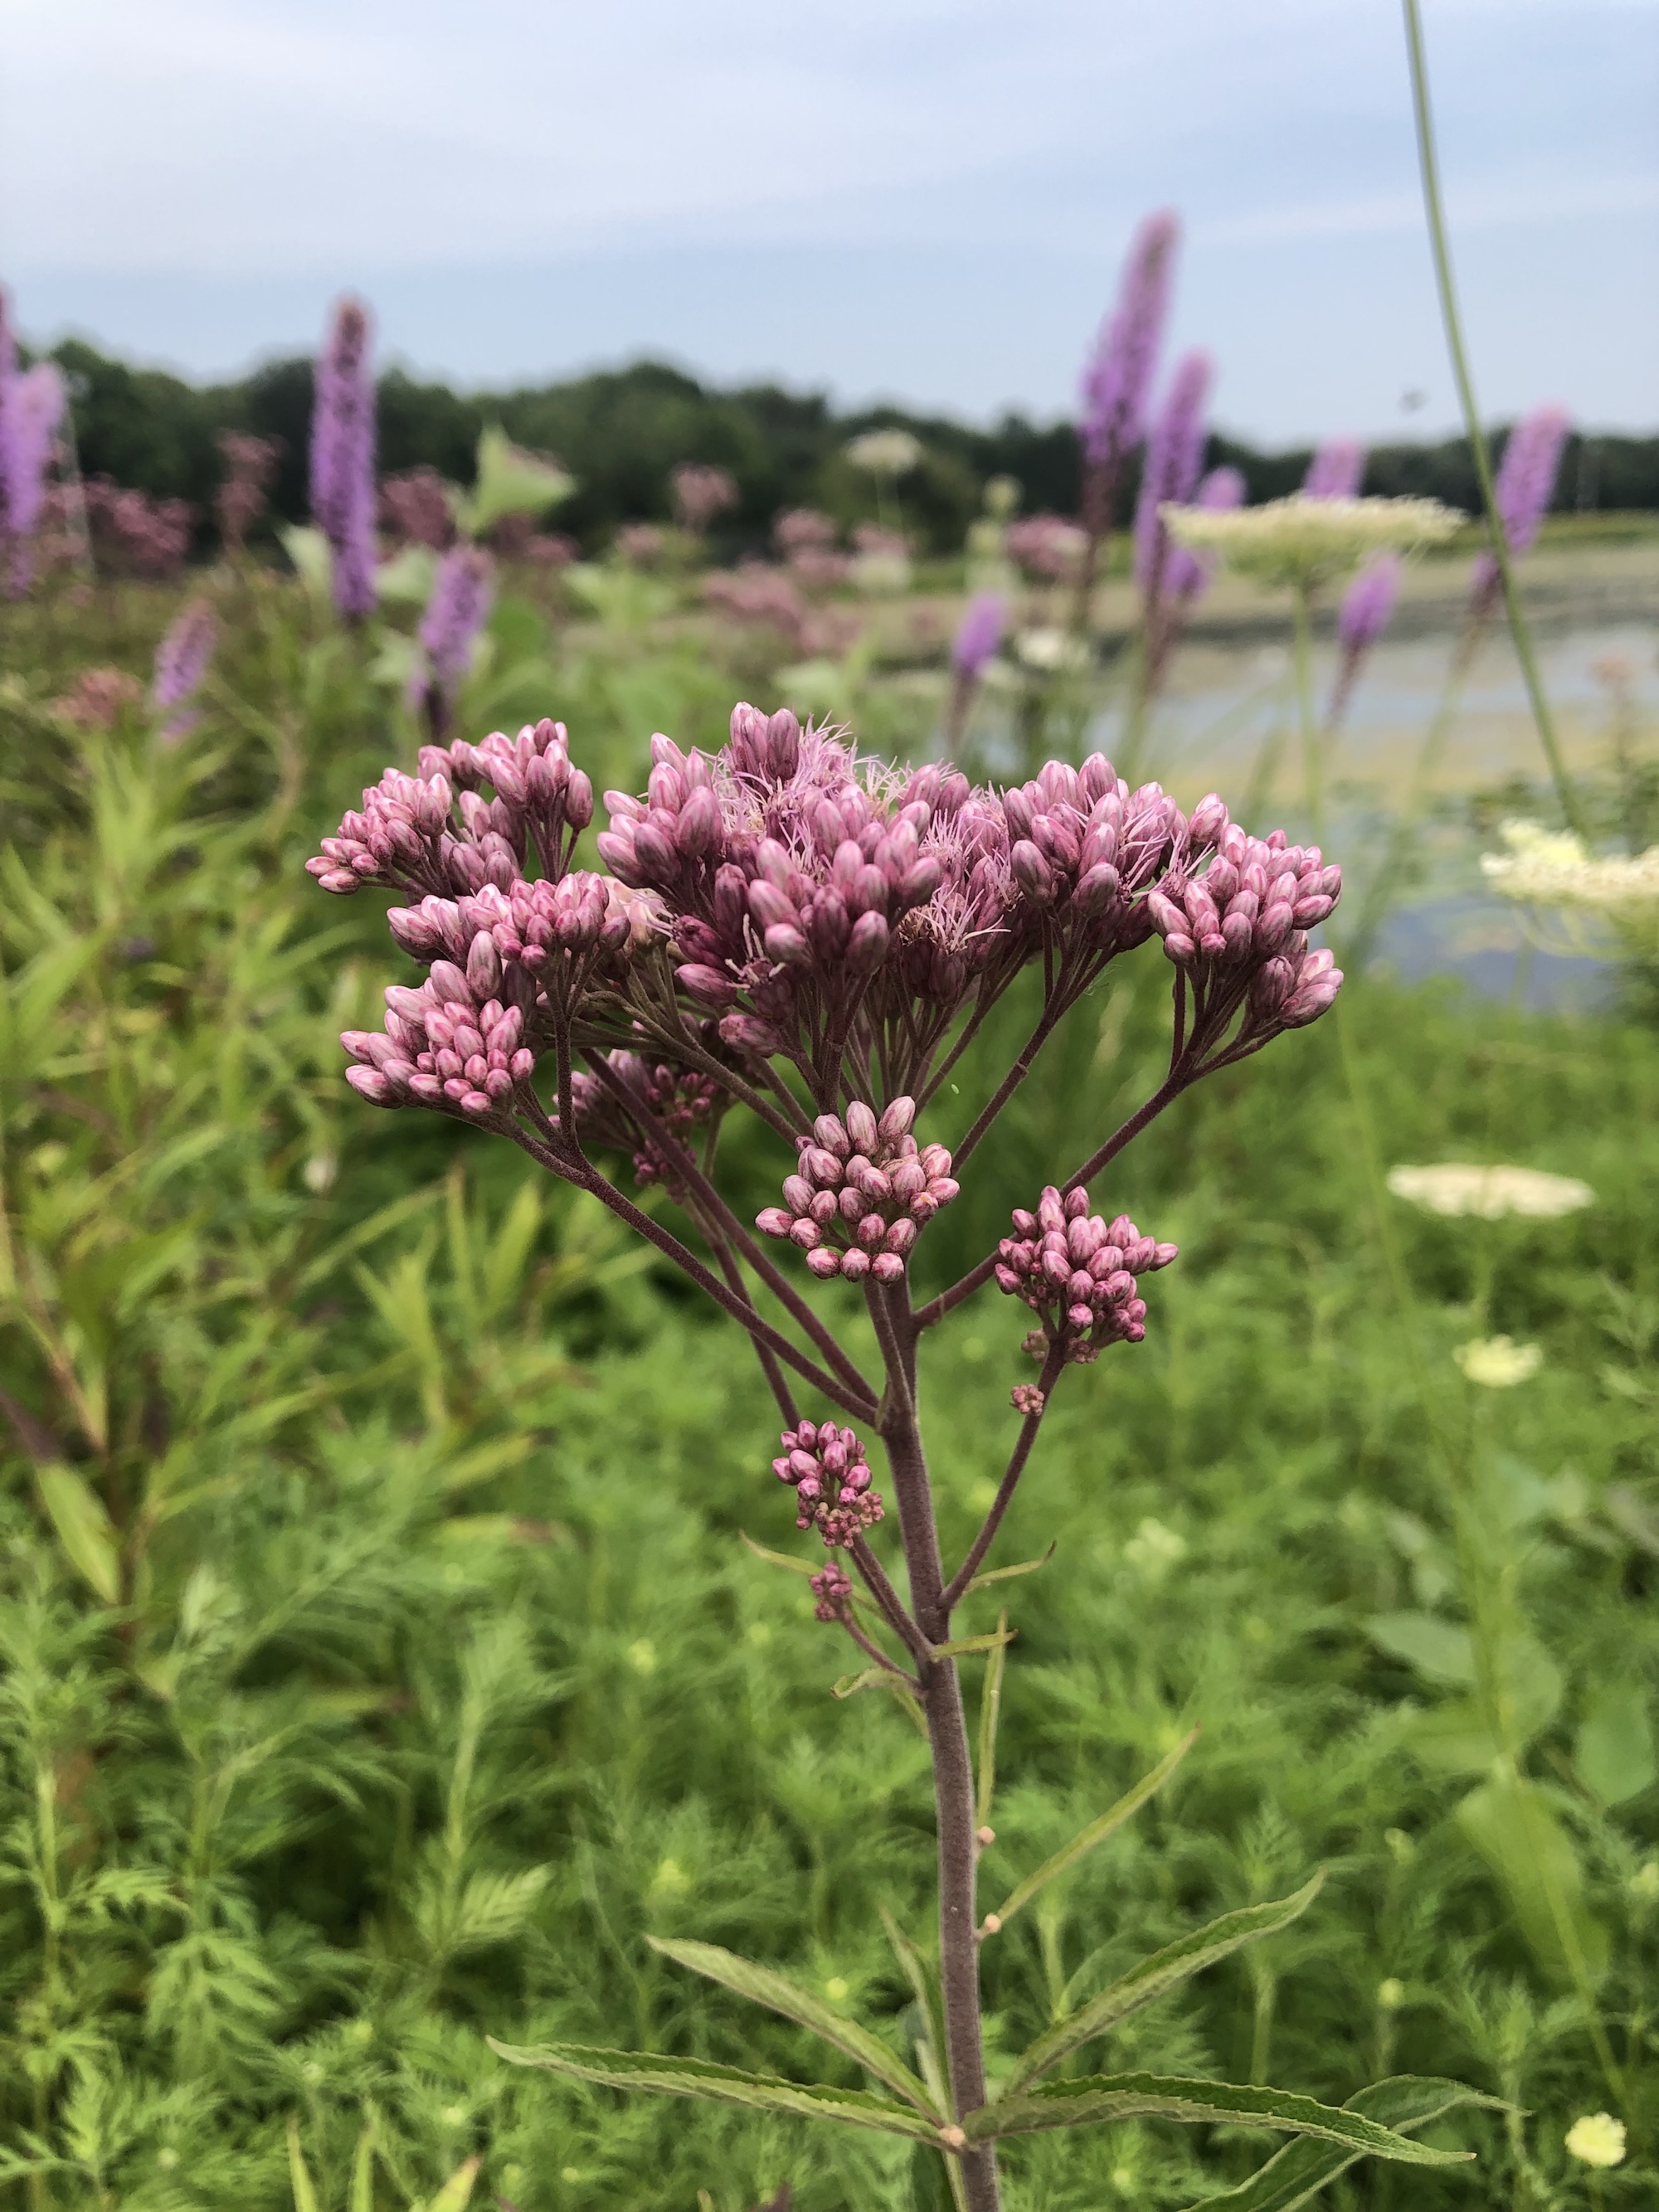 Spotted Joe-Pye Weed on shore of Vilas Park lagoon in Madison, Wisconsin on July 27, 2021.